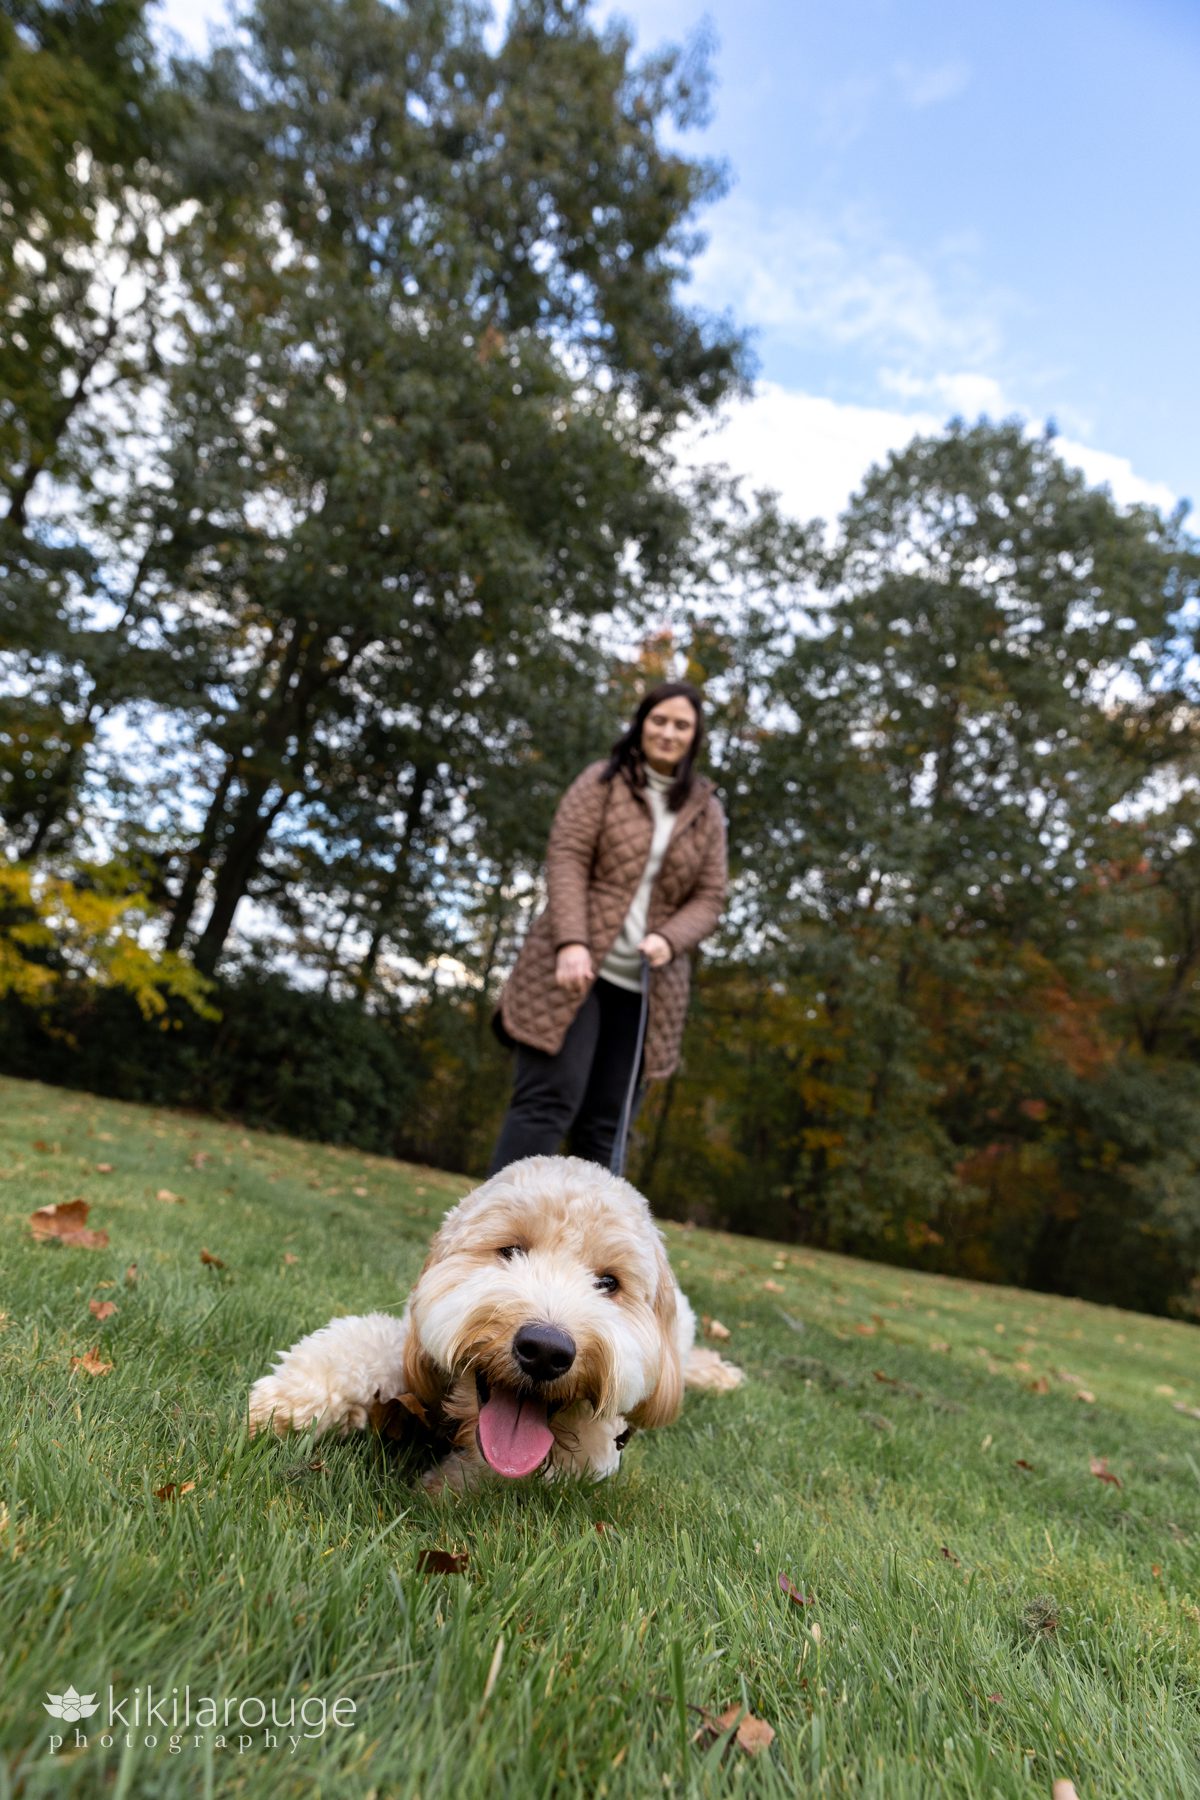 Cute dog on ground in grass with Mom holding leash in background